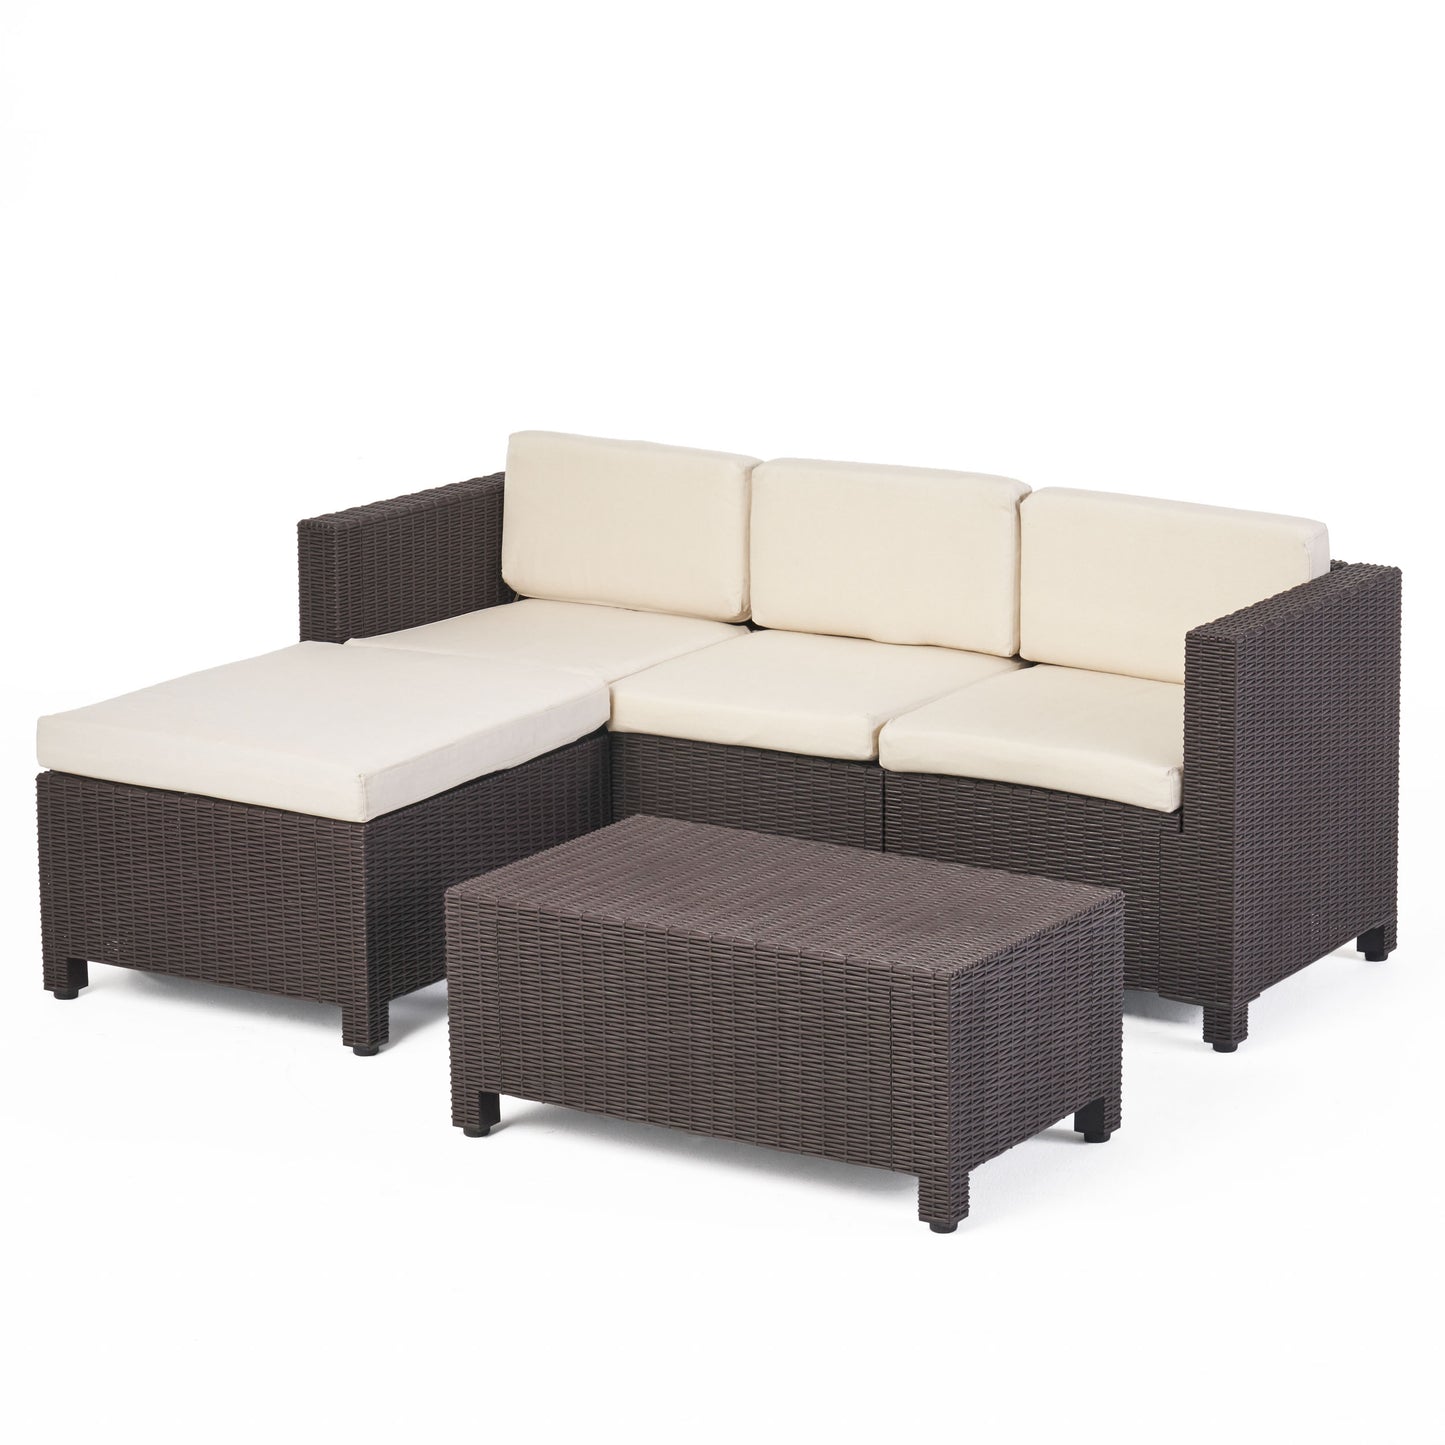 Russel Outdoor Injection Molded Small Space 3 Seater L Shaped Sectional, Dark Brown and Beige